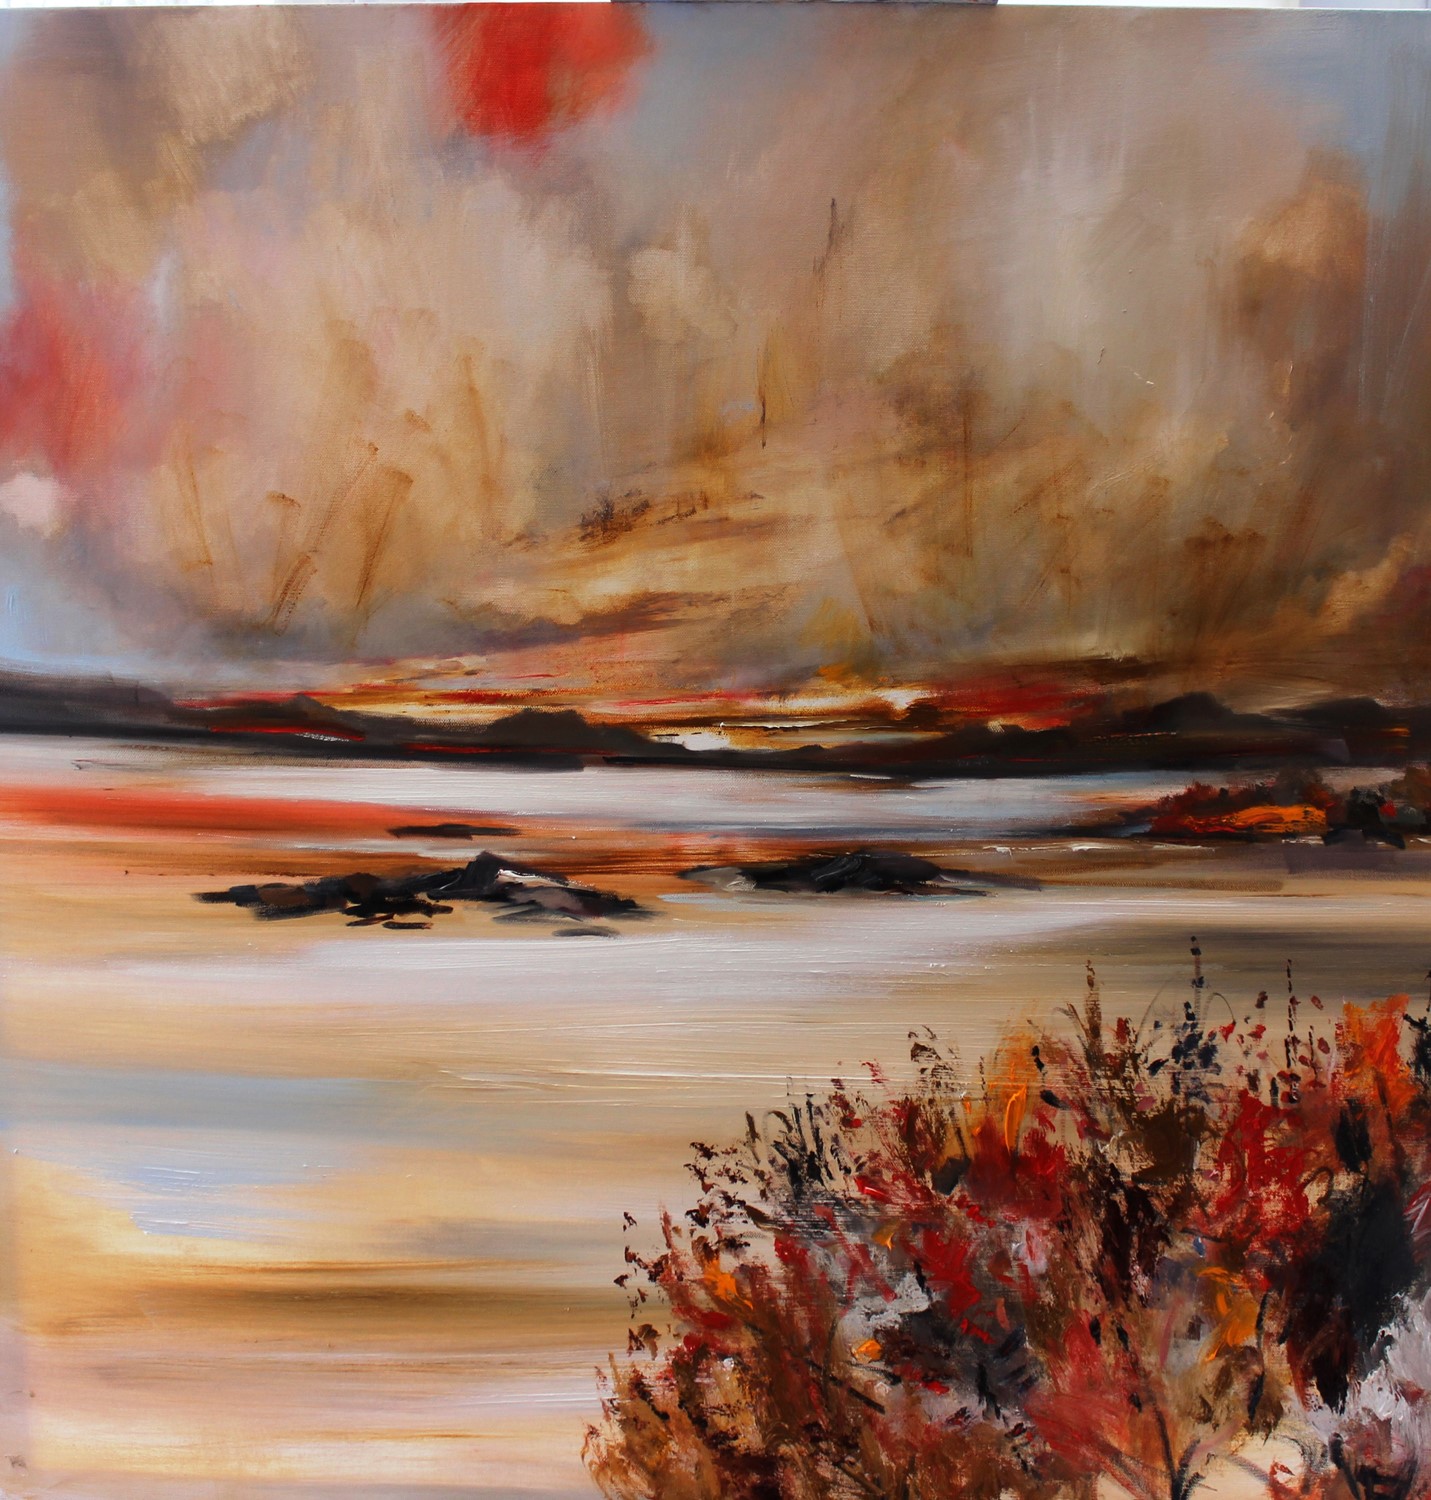 'View of the Isles' by artist Rosanne Barr